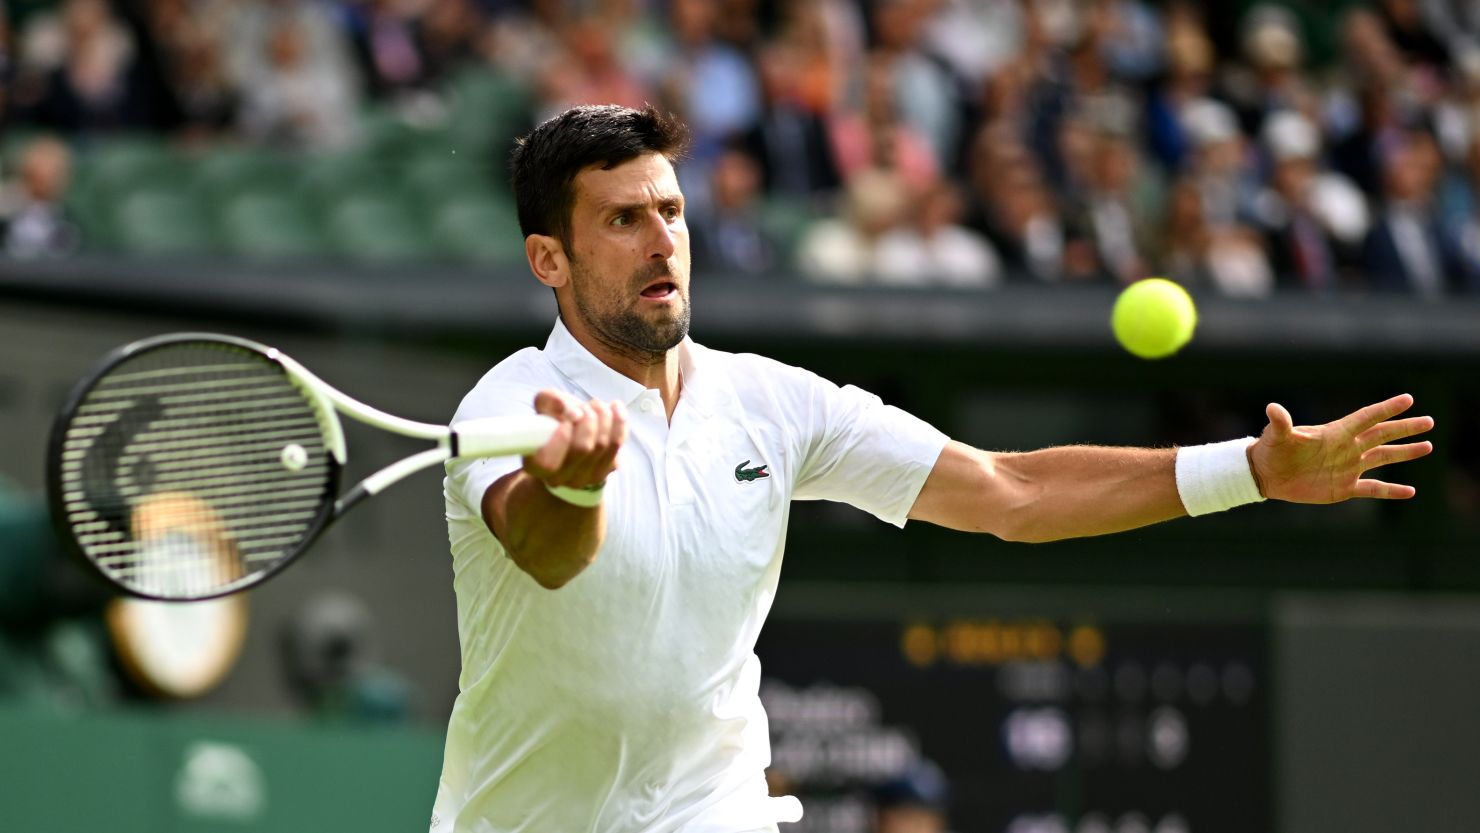 Novak Djokovic is bidding for his 24th grand slam title at Wimbledon this year.